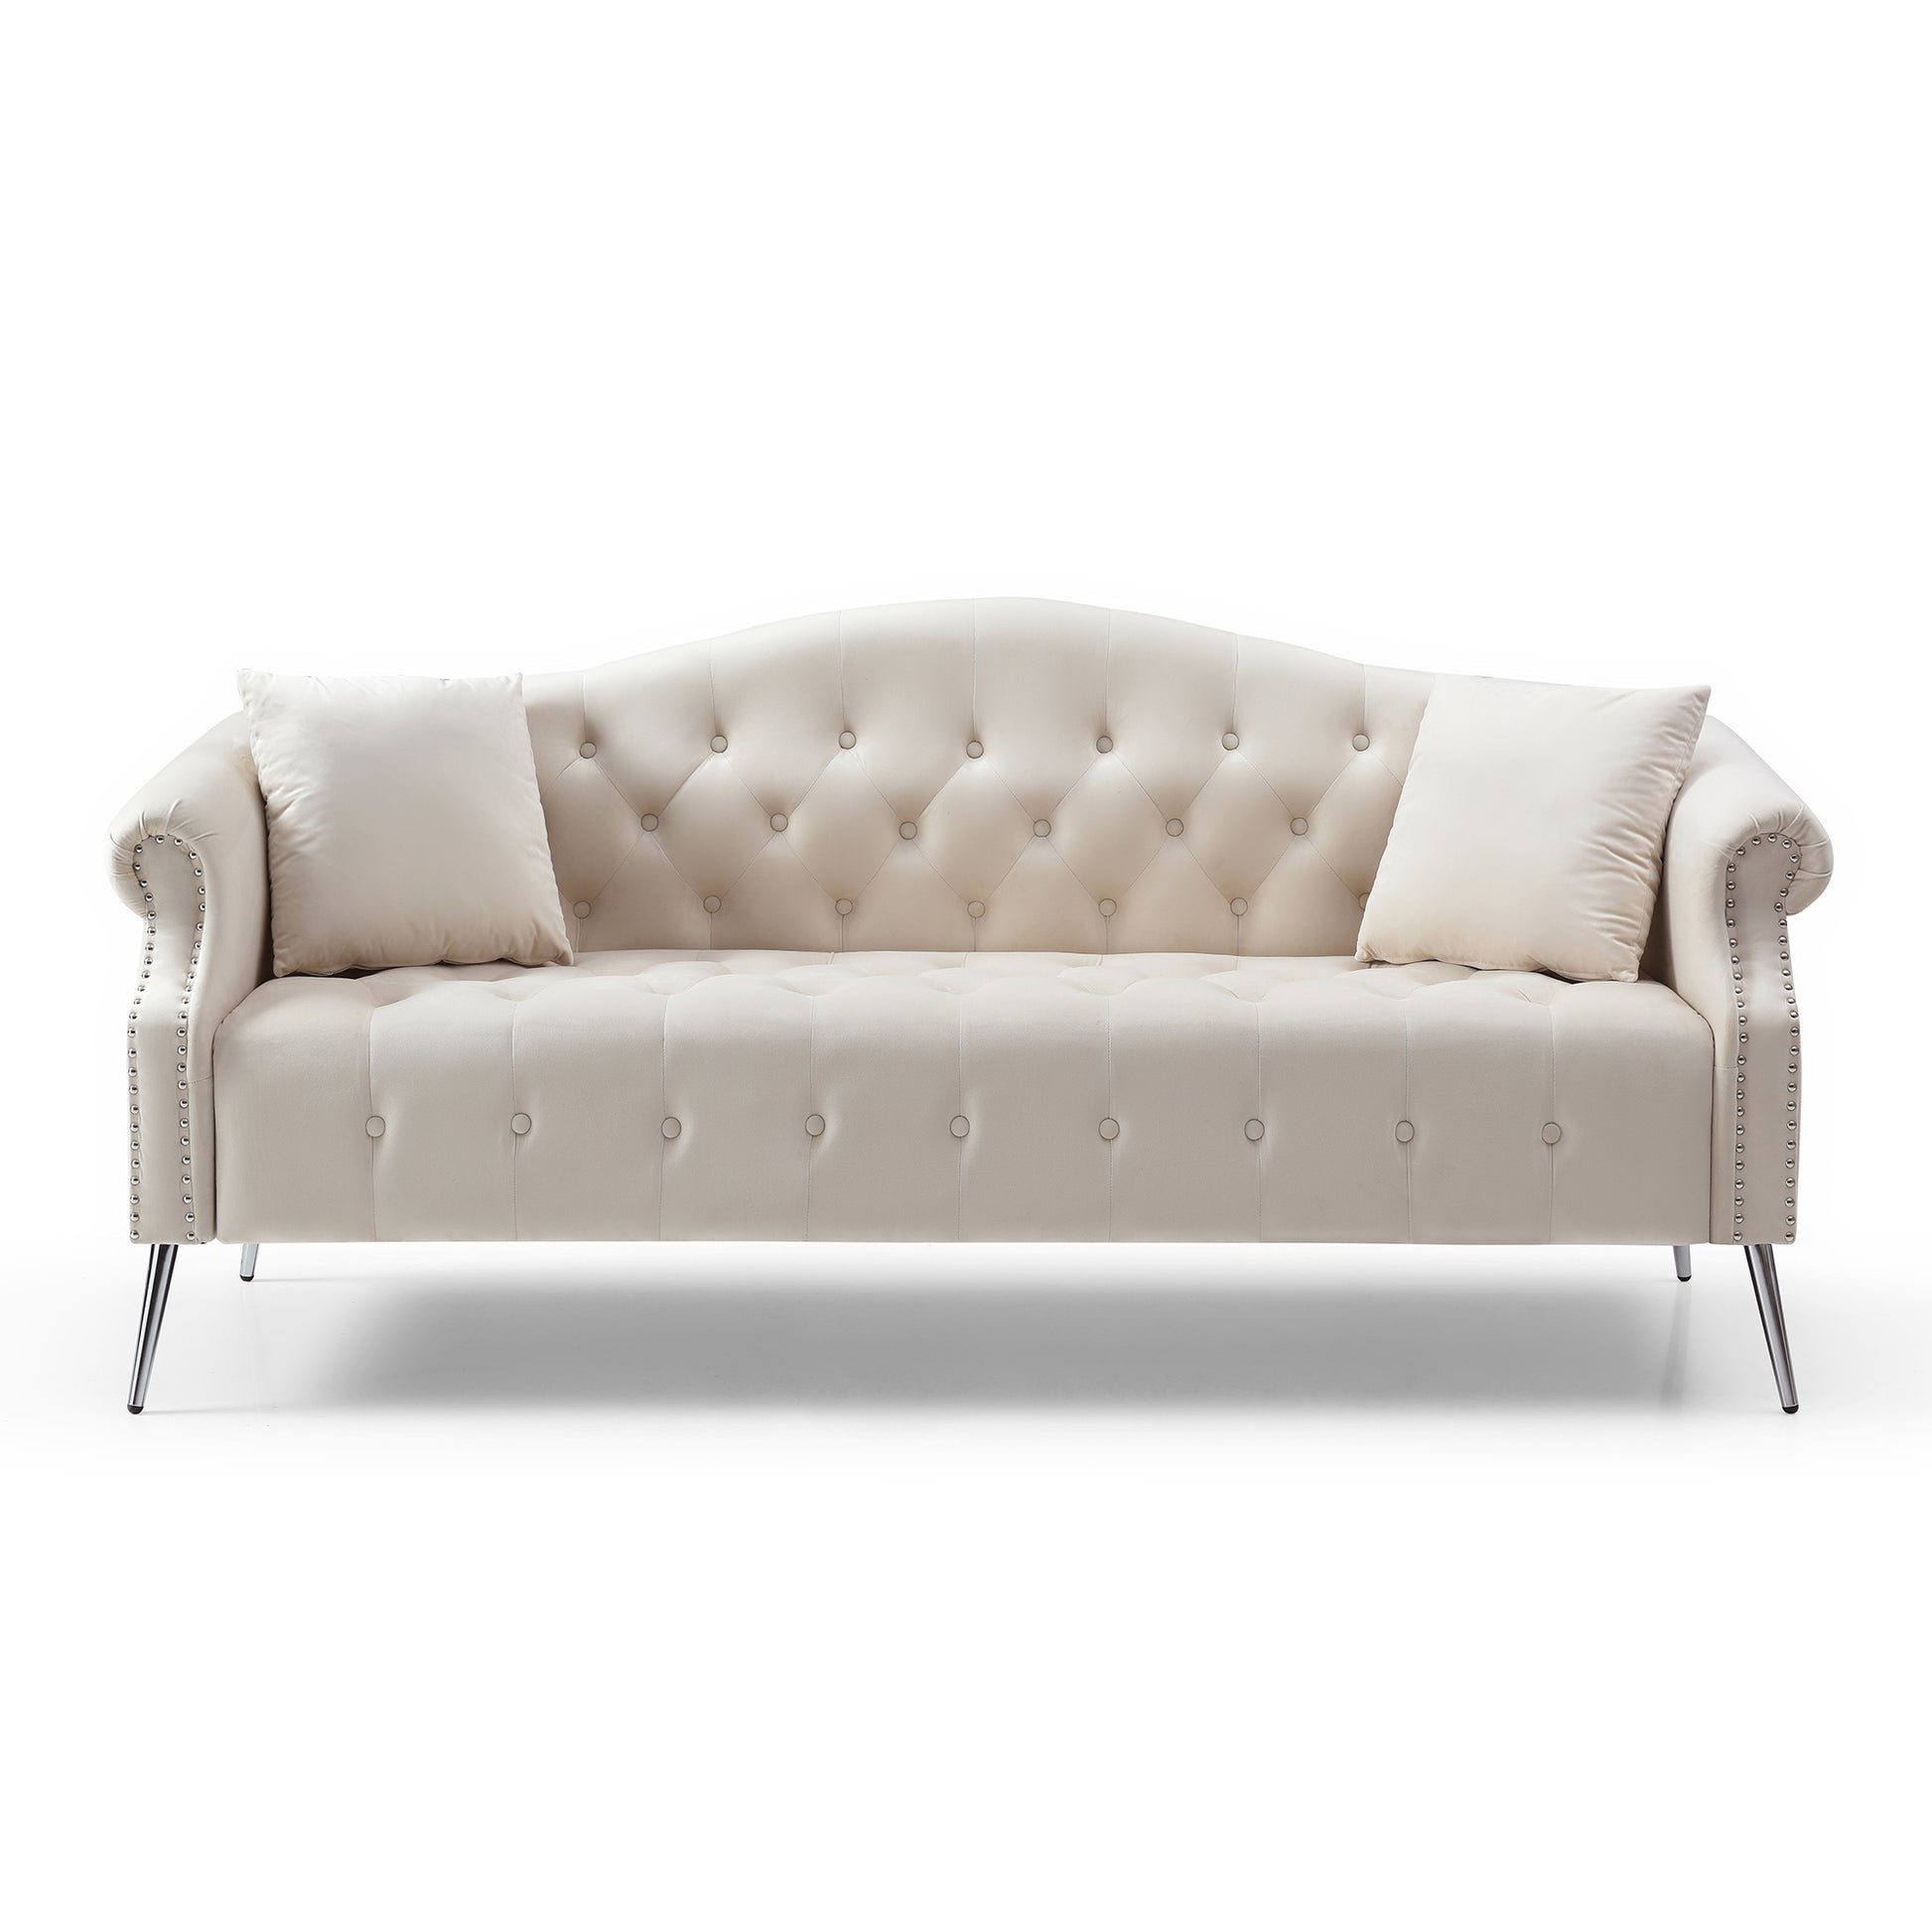 Classic Chesterfield Velvet Sofa Loveseat Contemporary Upholstered Couch Button Tufted Nailhead Trimming Curved Backrest Rolled Arms with Silver Metal Legs Living Room Set,4 Pillows Included,Beige - Enova Luxe Home Store